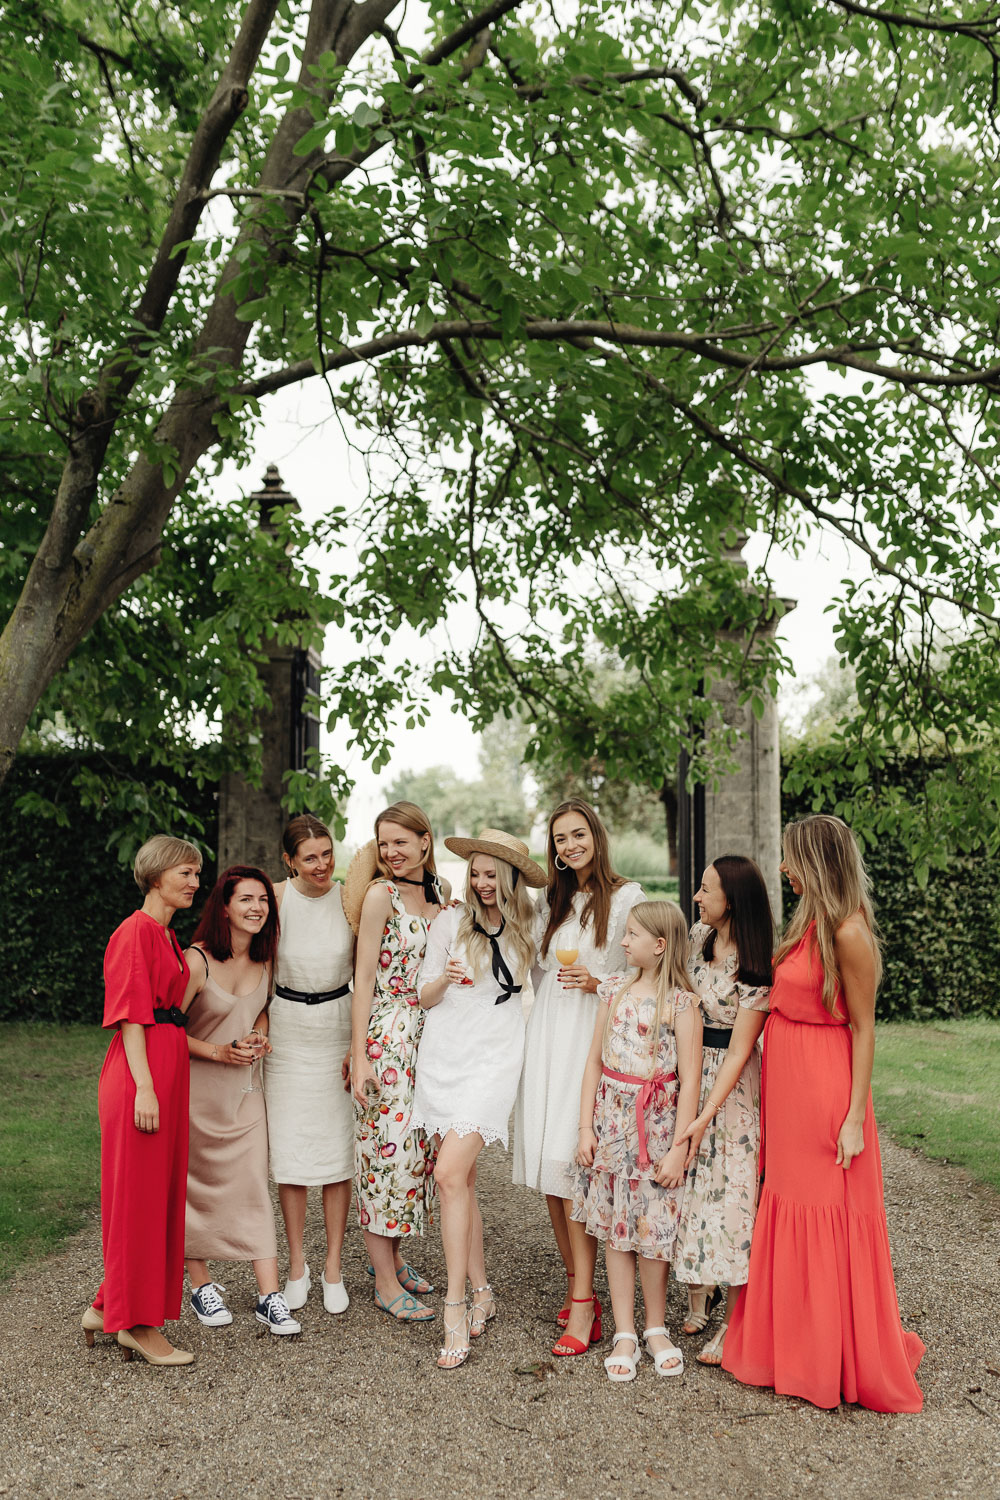 Bridesmaids in white and red dresses are happy and smiling